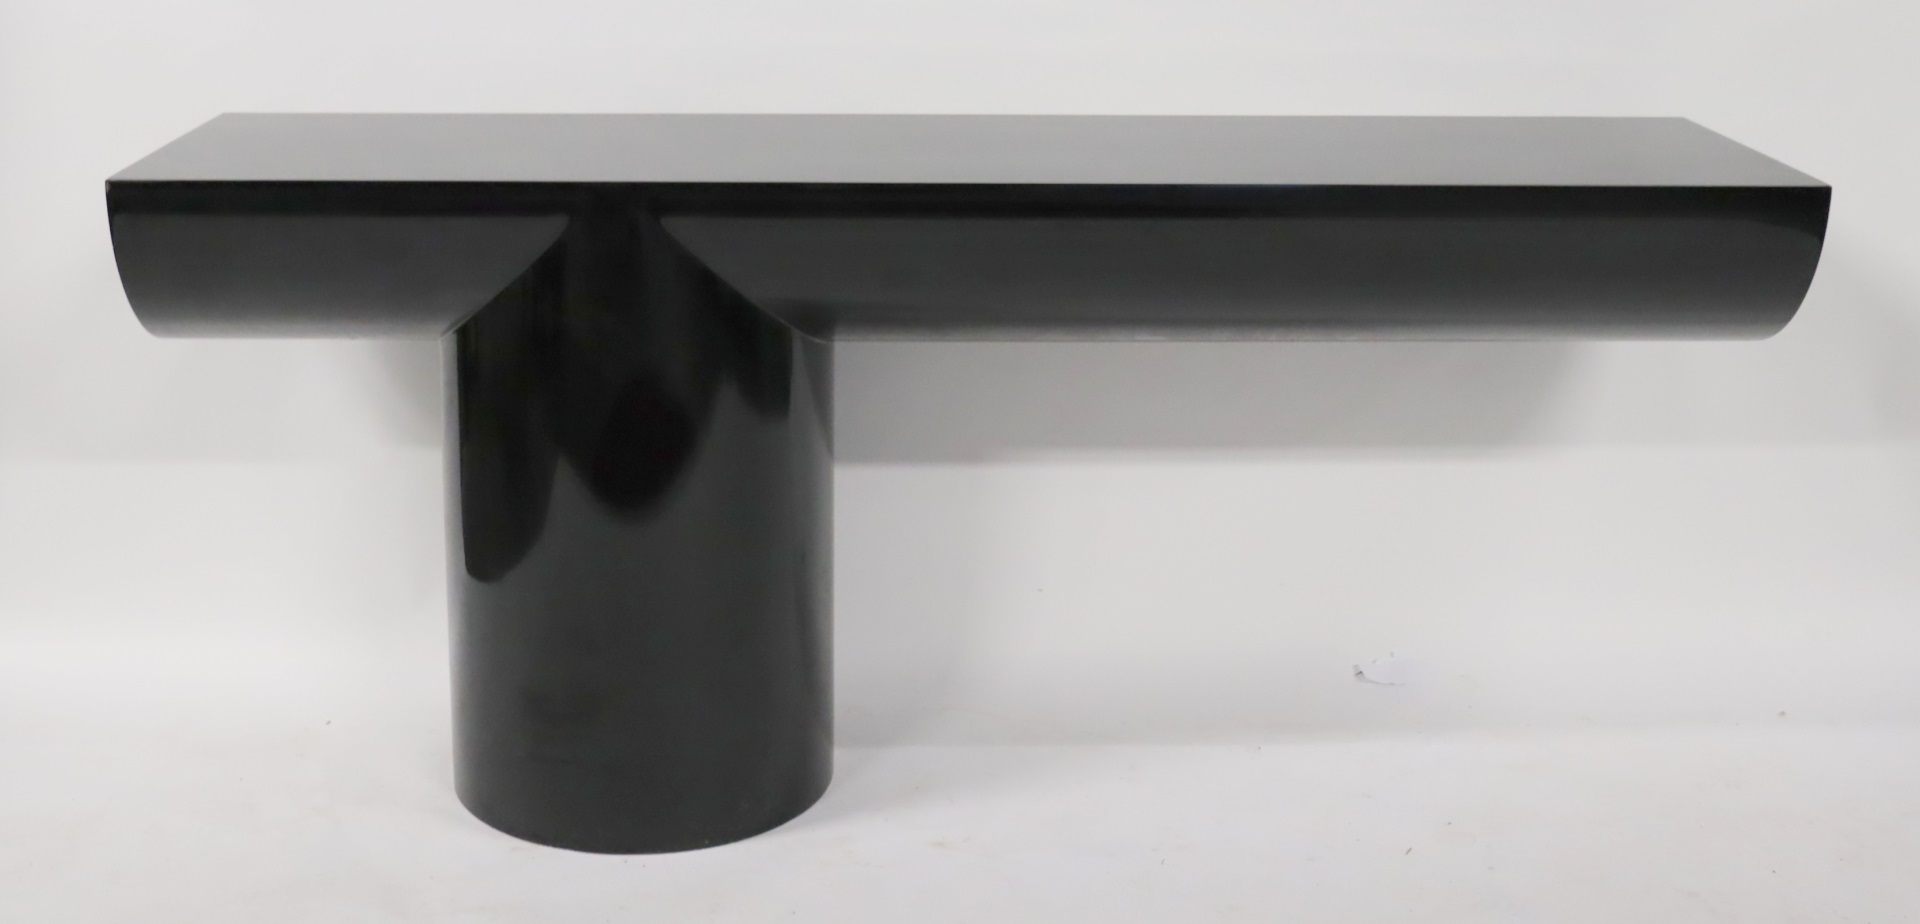 MIDCENTURY STYLE BLACK LACQUERED 3bdeec